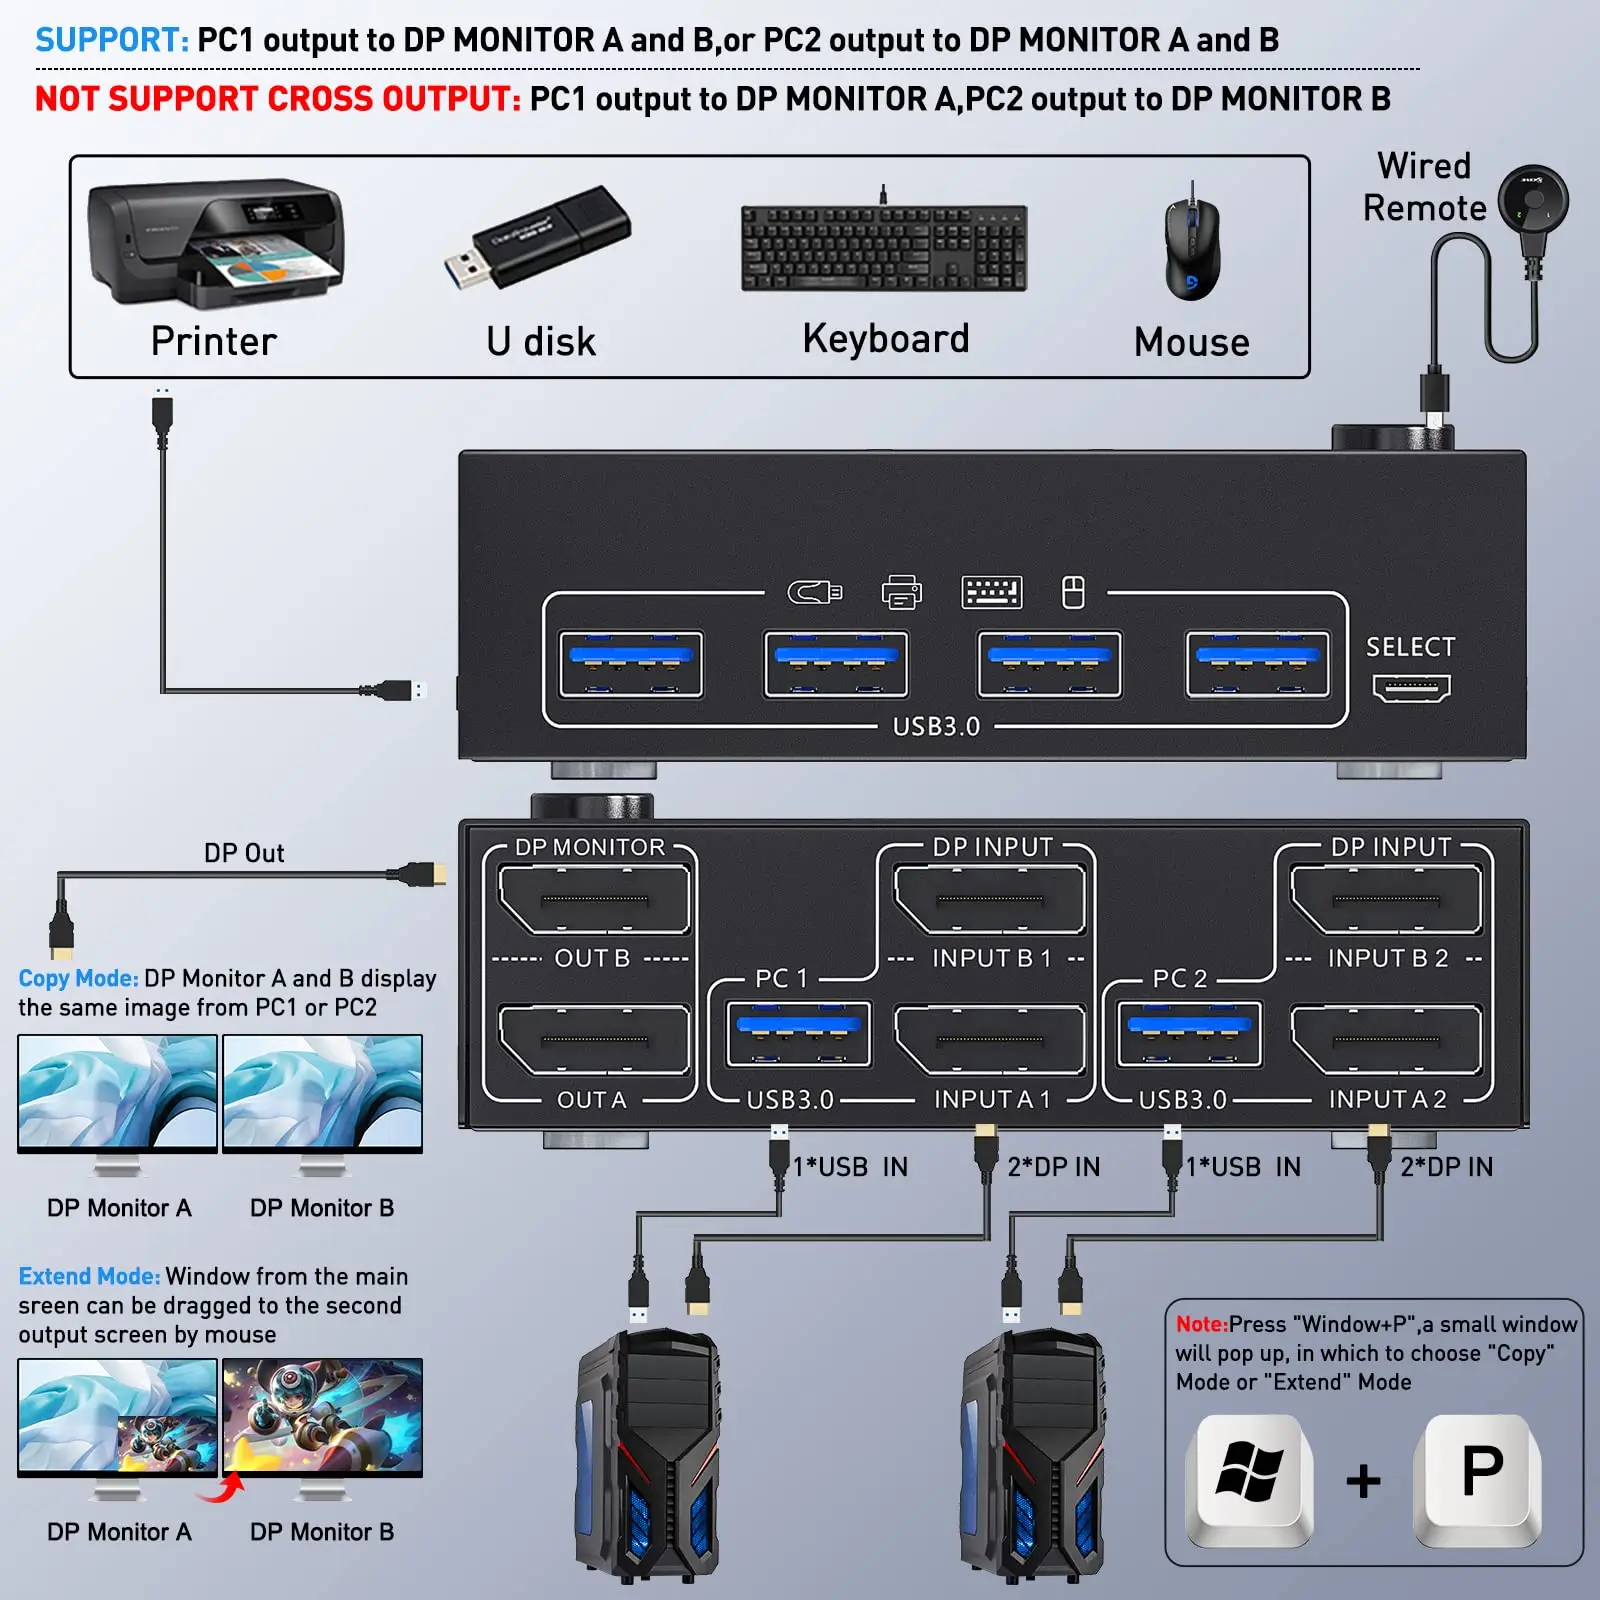 KVM Switch Dual Monitor DisplayPort ,2 in 2 Out DP 1.4 KVM Switch, 4 USB3.0  for 2 Computers, Back nward Compatible DP1.2